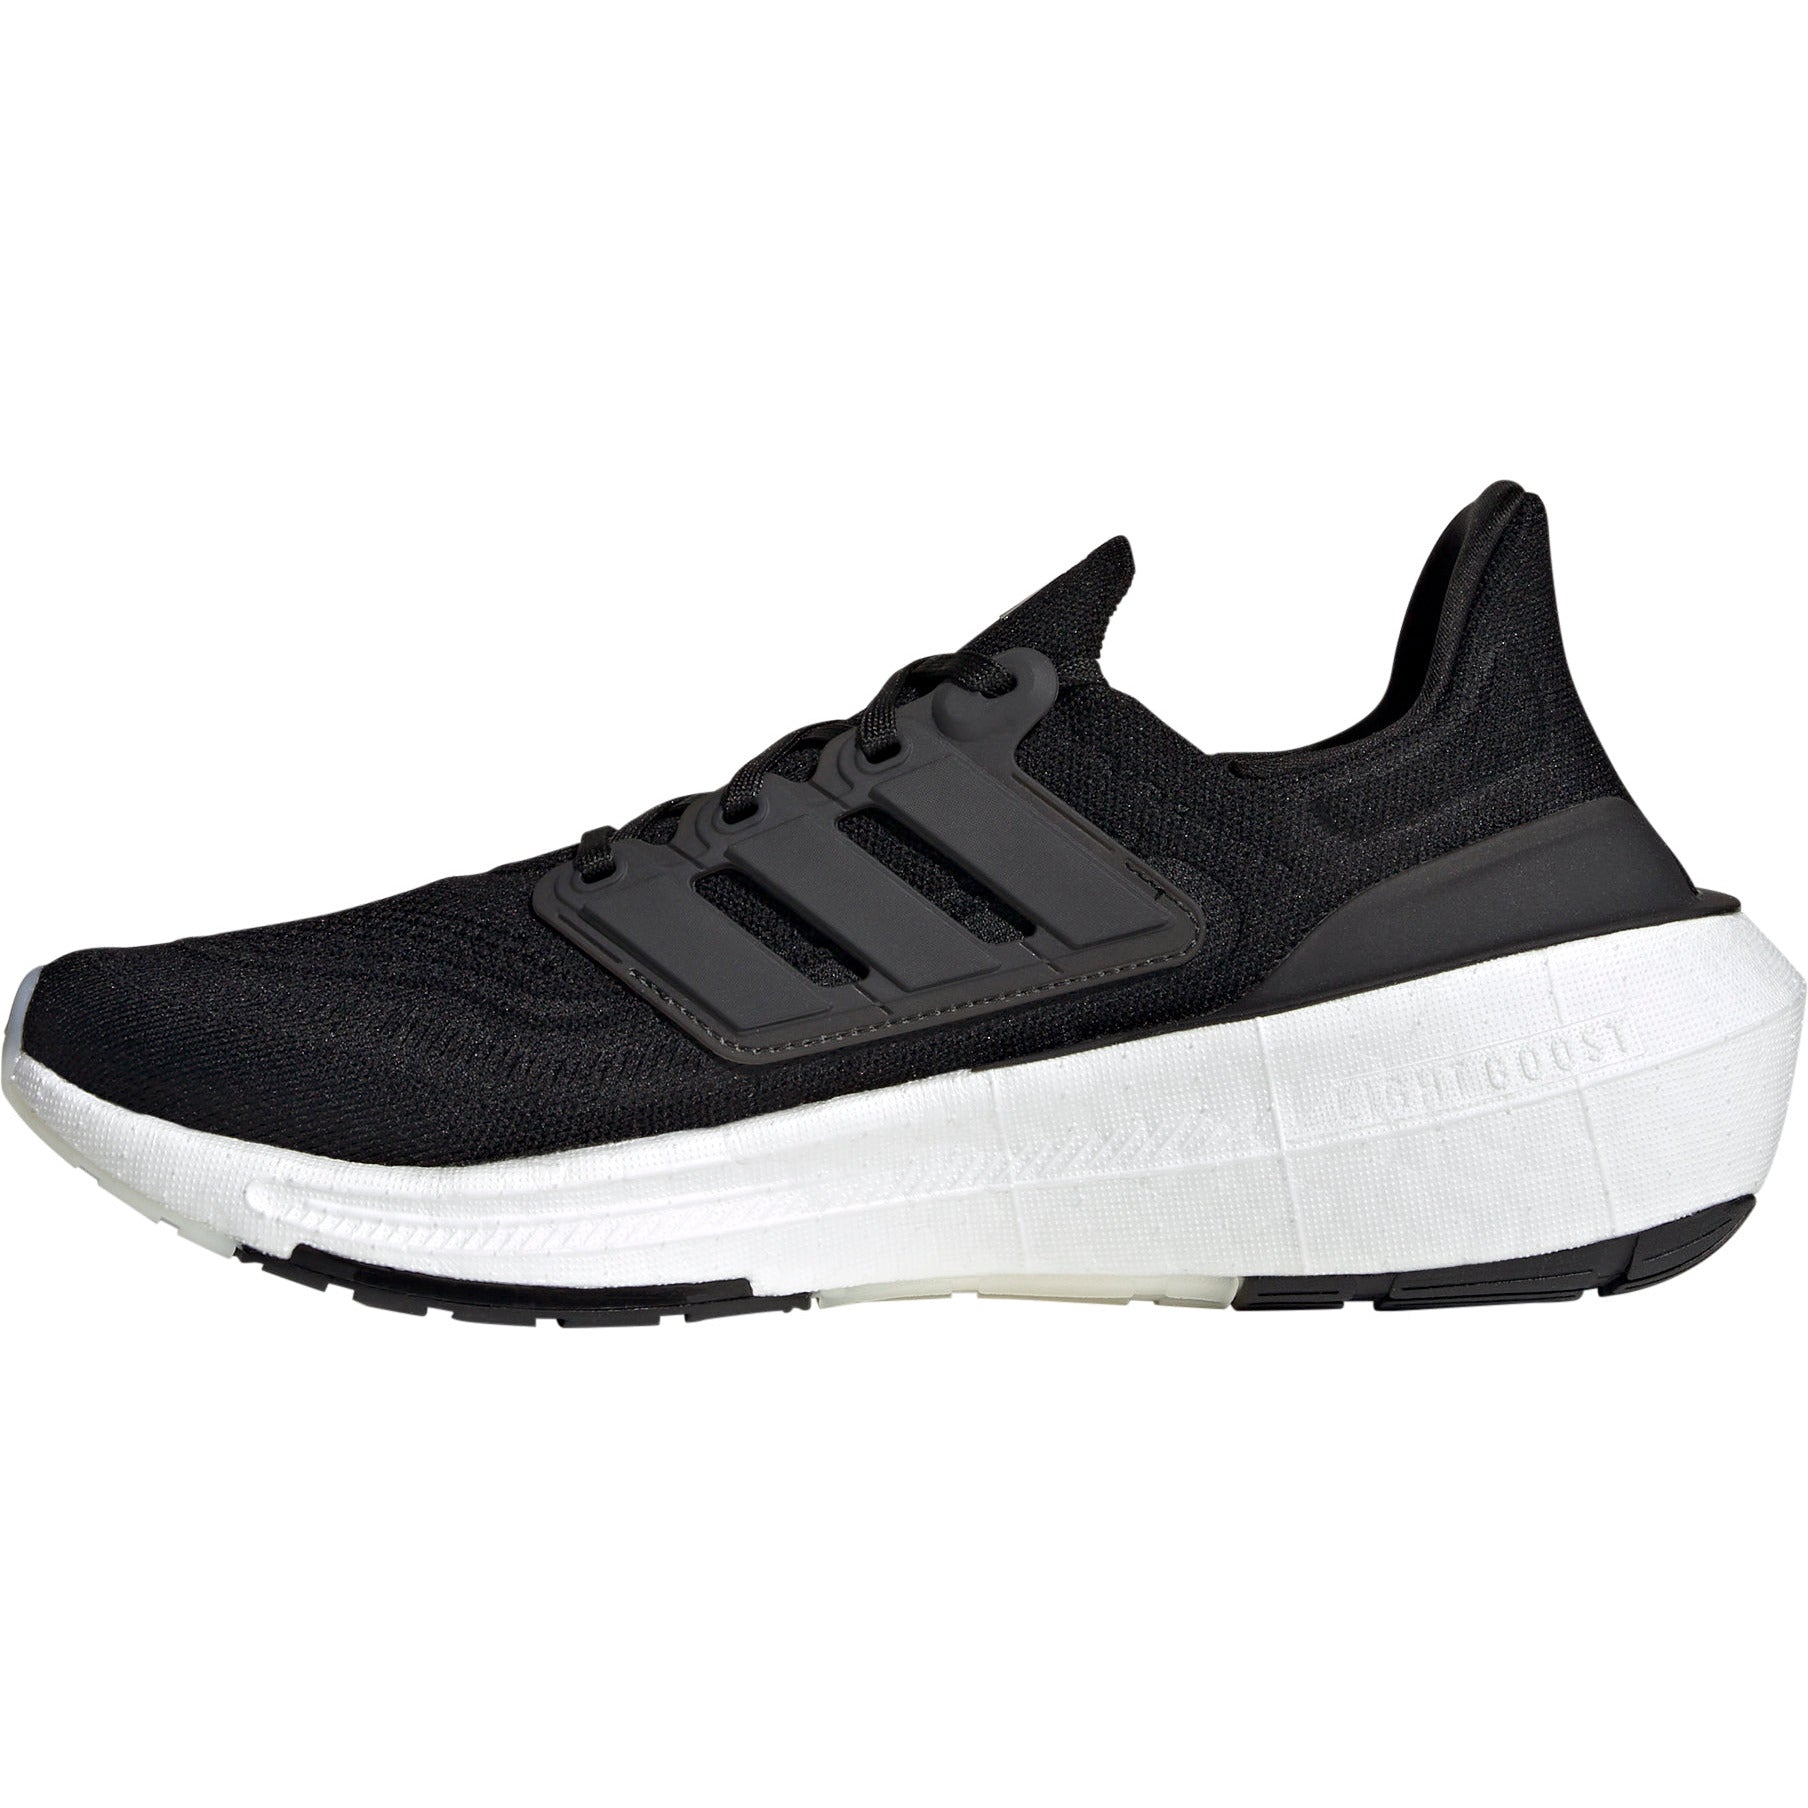 Adidas Ultra Boost Light Gy9351 Inside - Side View